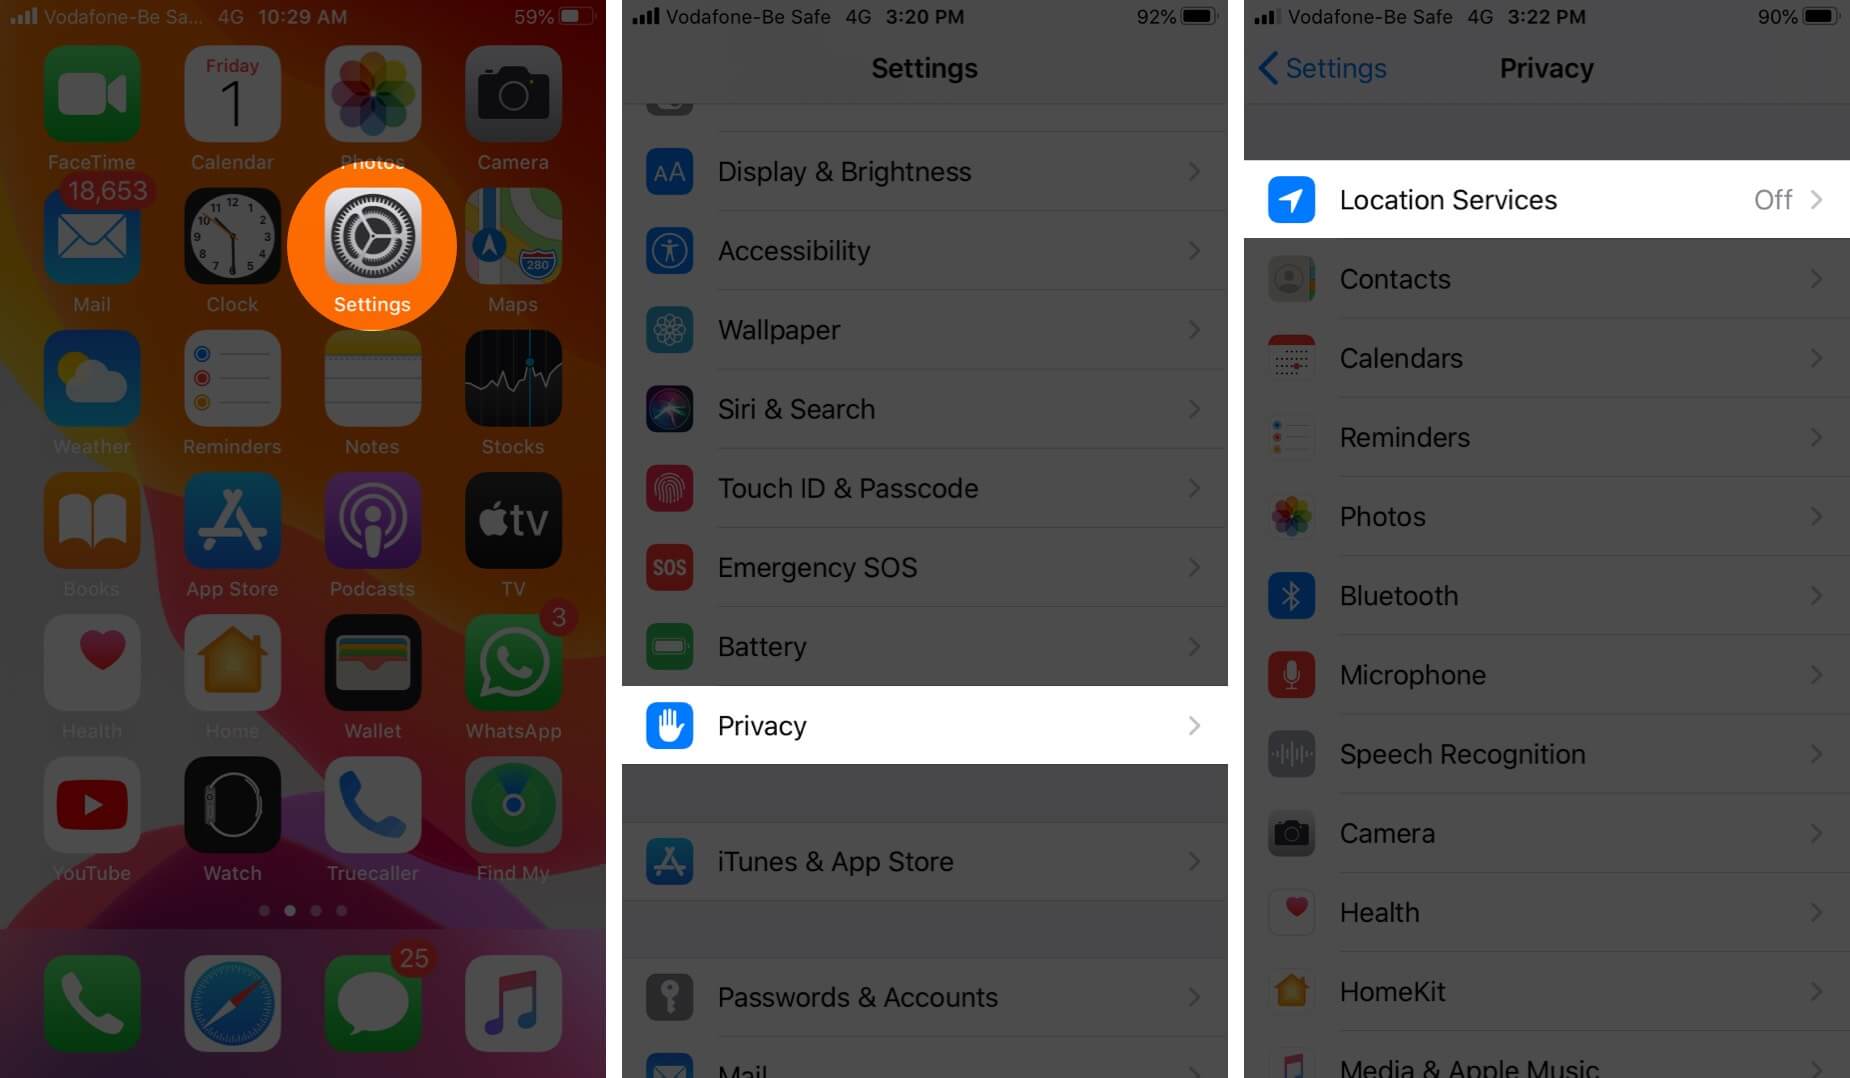 Open Settings Tap on Privacy and Then Tap on Location Services on iPhone